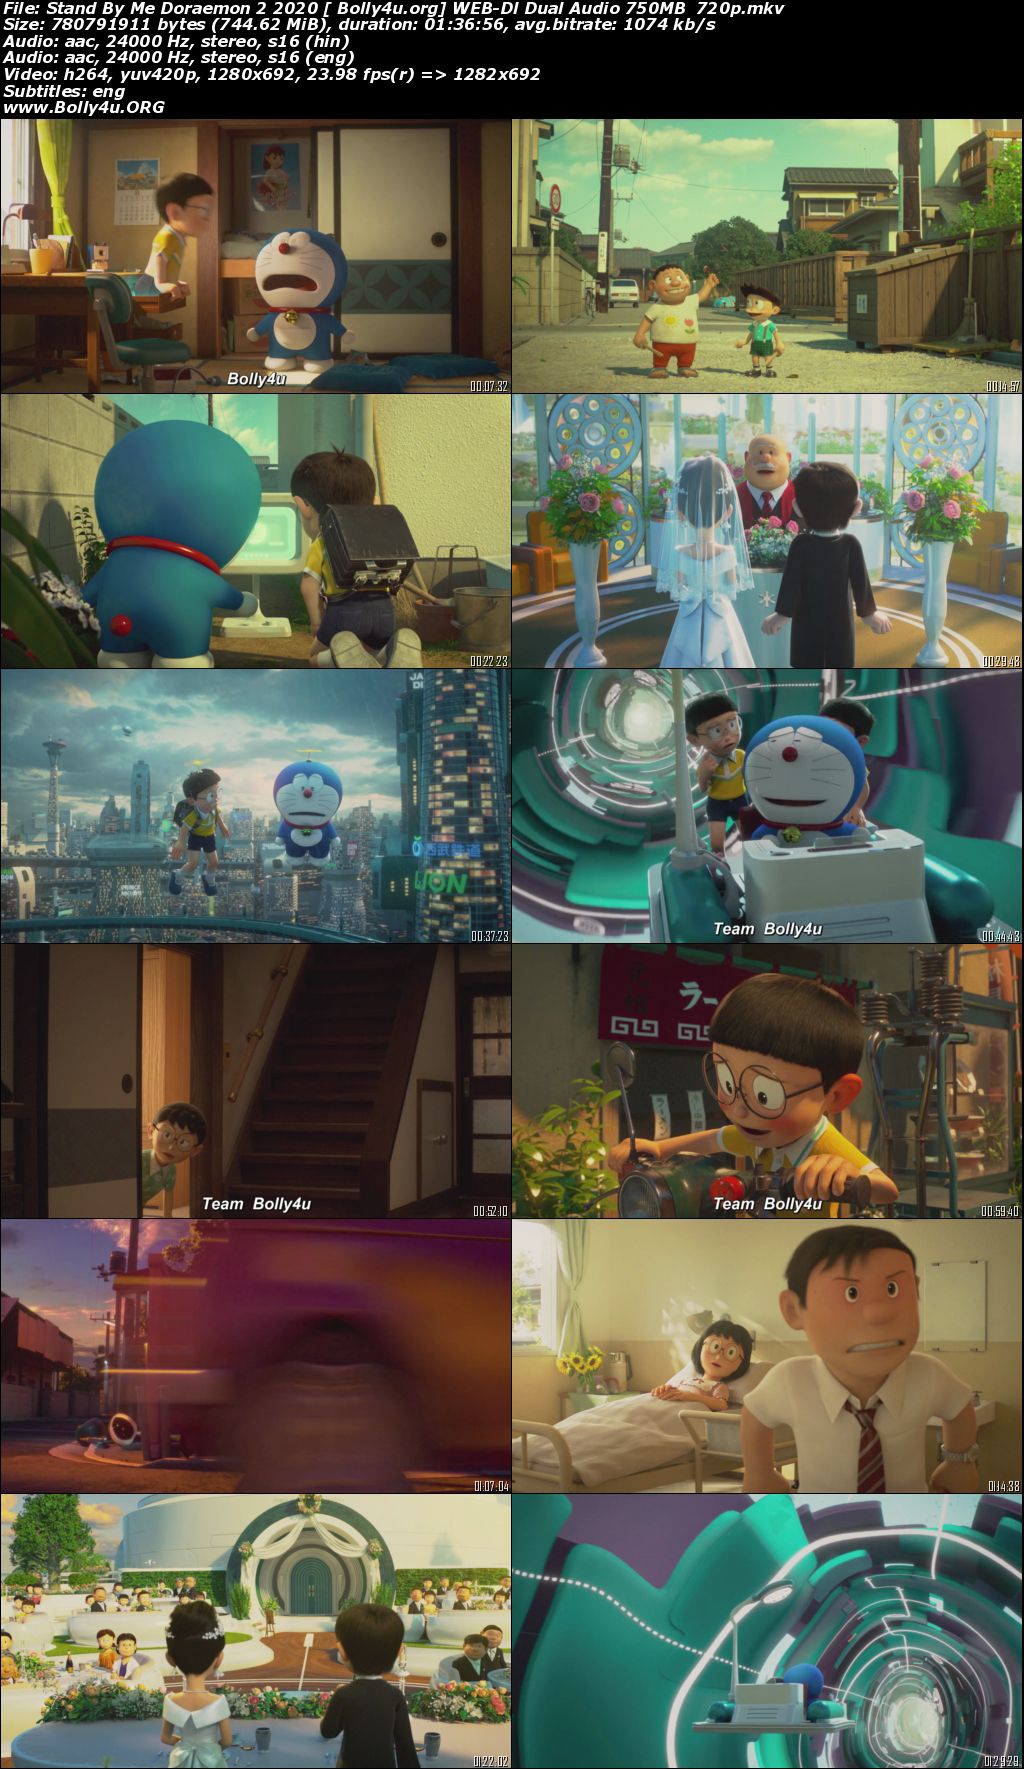 Stand By Me Doraemon 2 2020 WEB-DL 750MB Hindi Dual Audio 720p Download